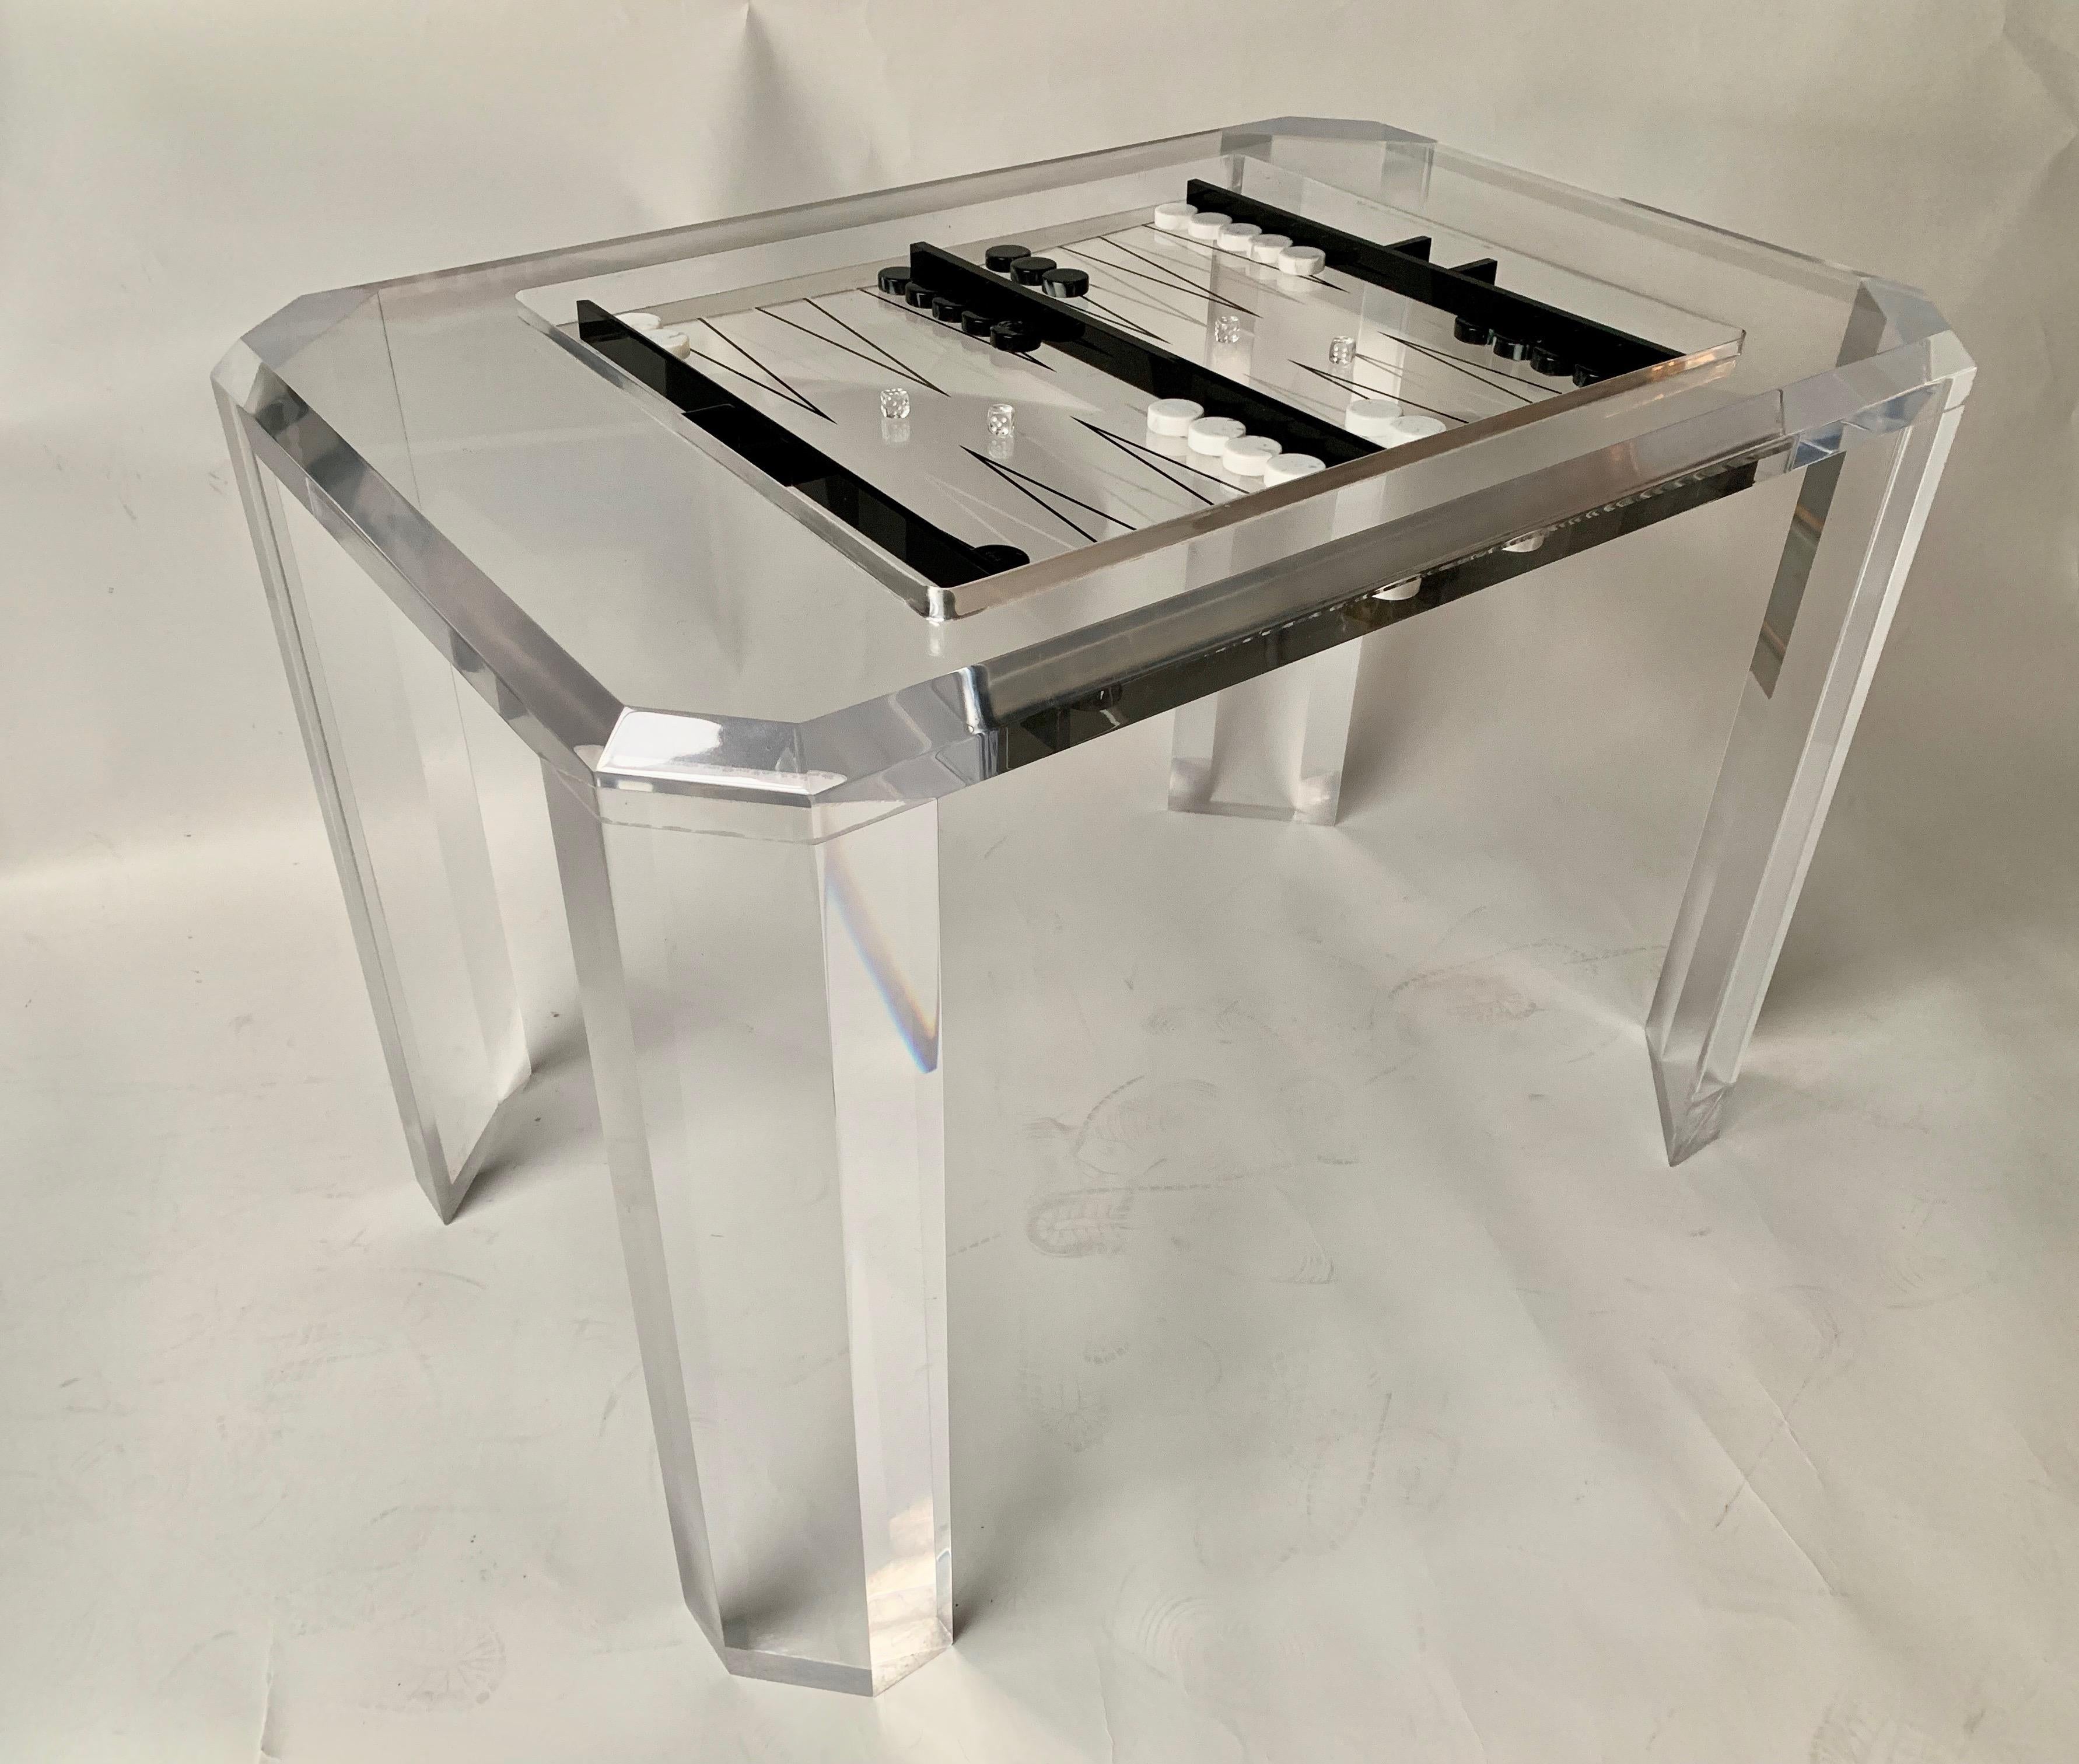 Vintage Lucite backgammon table with faceted legs and top. Great lines. Inset backgammon board made of Lucite as well. Bakelite chips in black and white along with acrylic dice included. Thick glass game board cover with two finger holes for